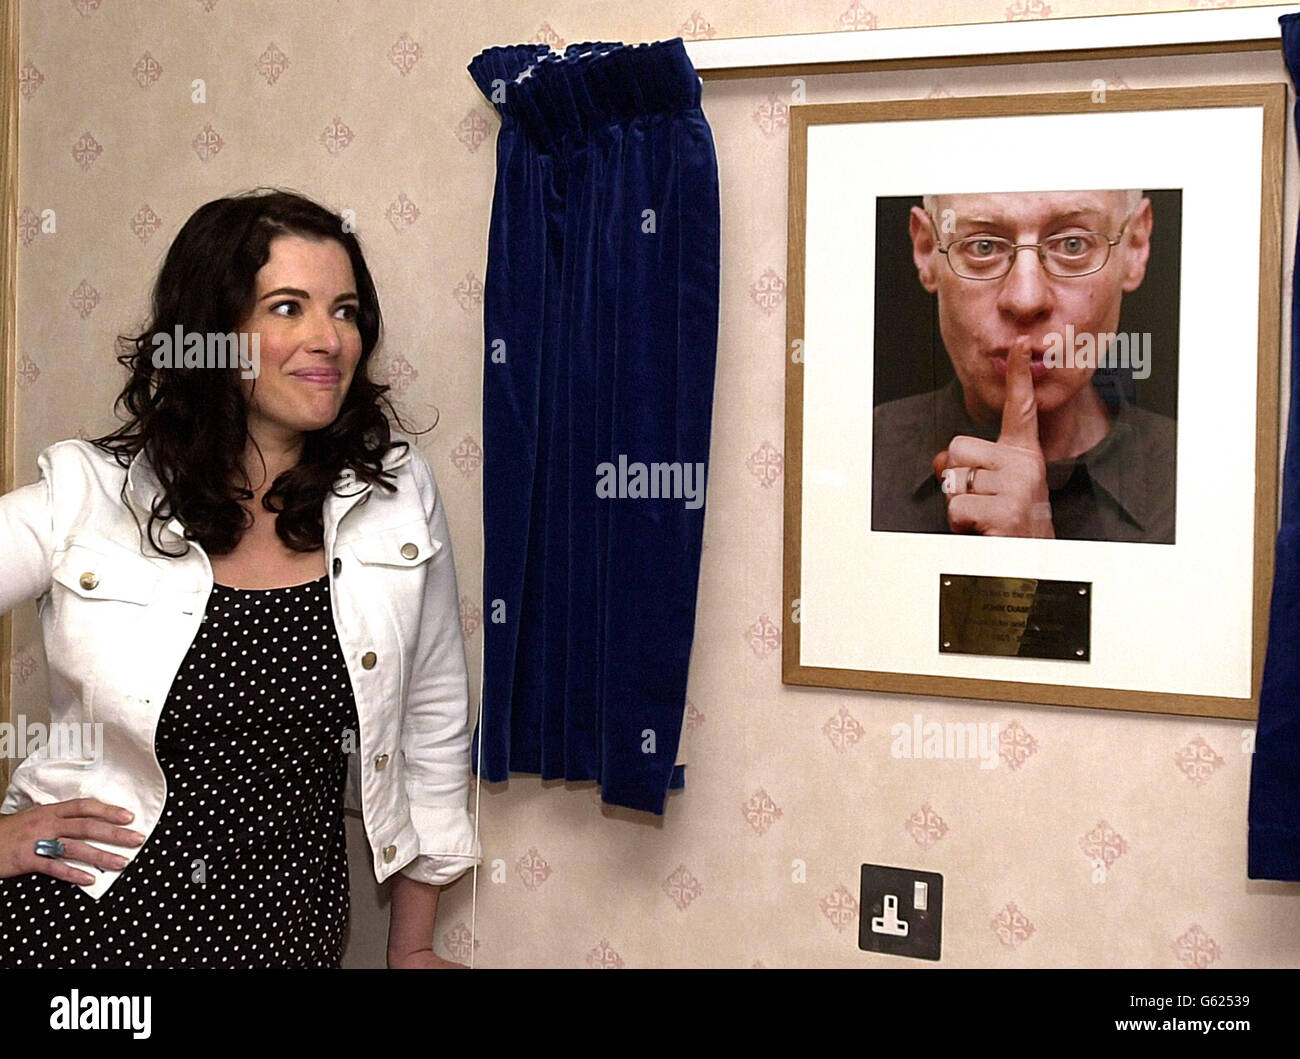 TV cook Nigella Lawson after unveiling a dedicated plaque and portrait of her late husband, broadcaster John Diamond to mark the opening of a state of the art voice laboratory at The Royal Marsden Hospital in London, John Diamond was a patient at the Royal Marsden, before his death. *.... on the 2nd March last year. Stock Photo